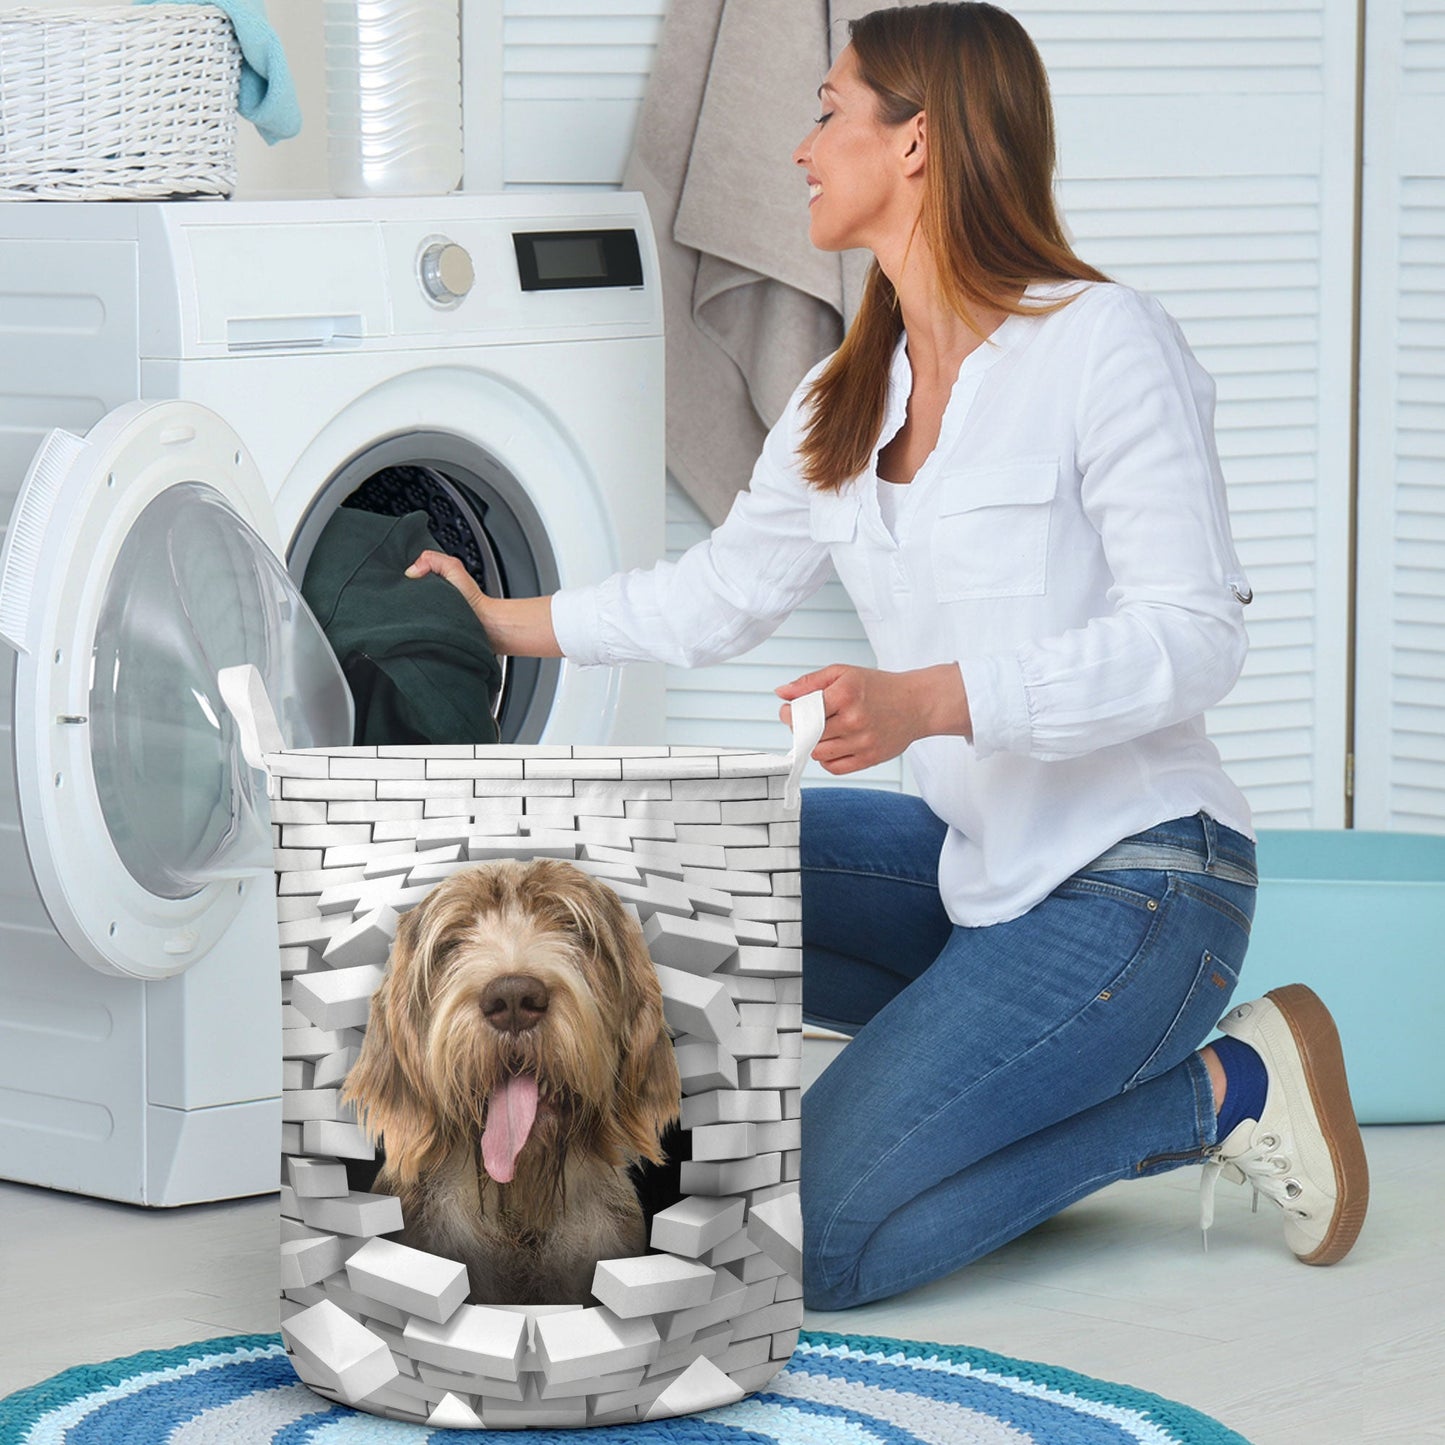 Spinone Italiano - In The Hole Of Wall Pattern Laundry Basket